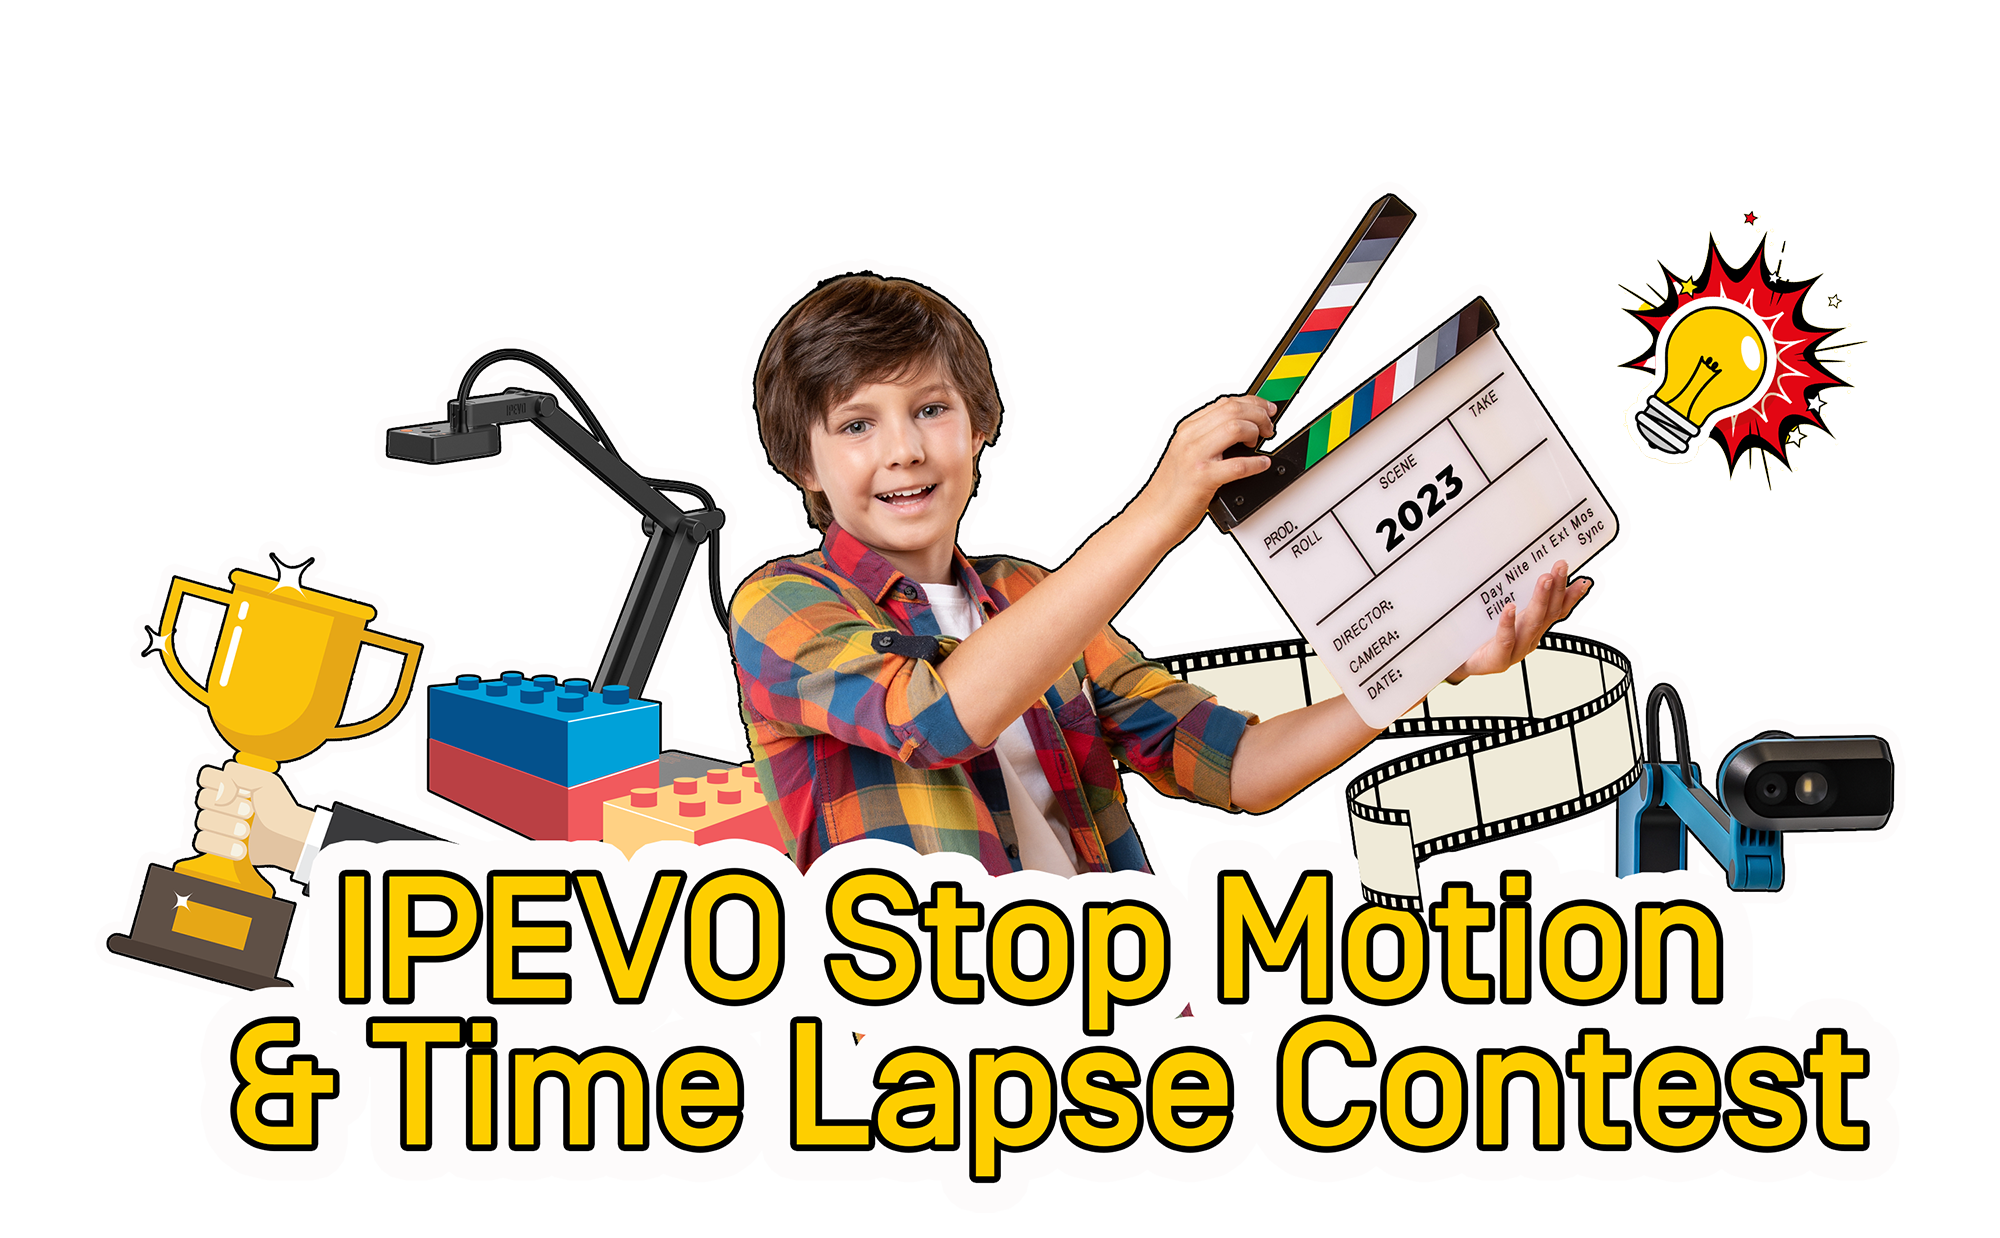 IPEVO Stop Motion & Time Lapse Contest